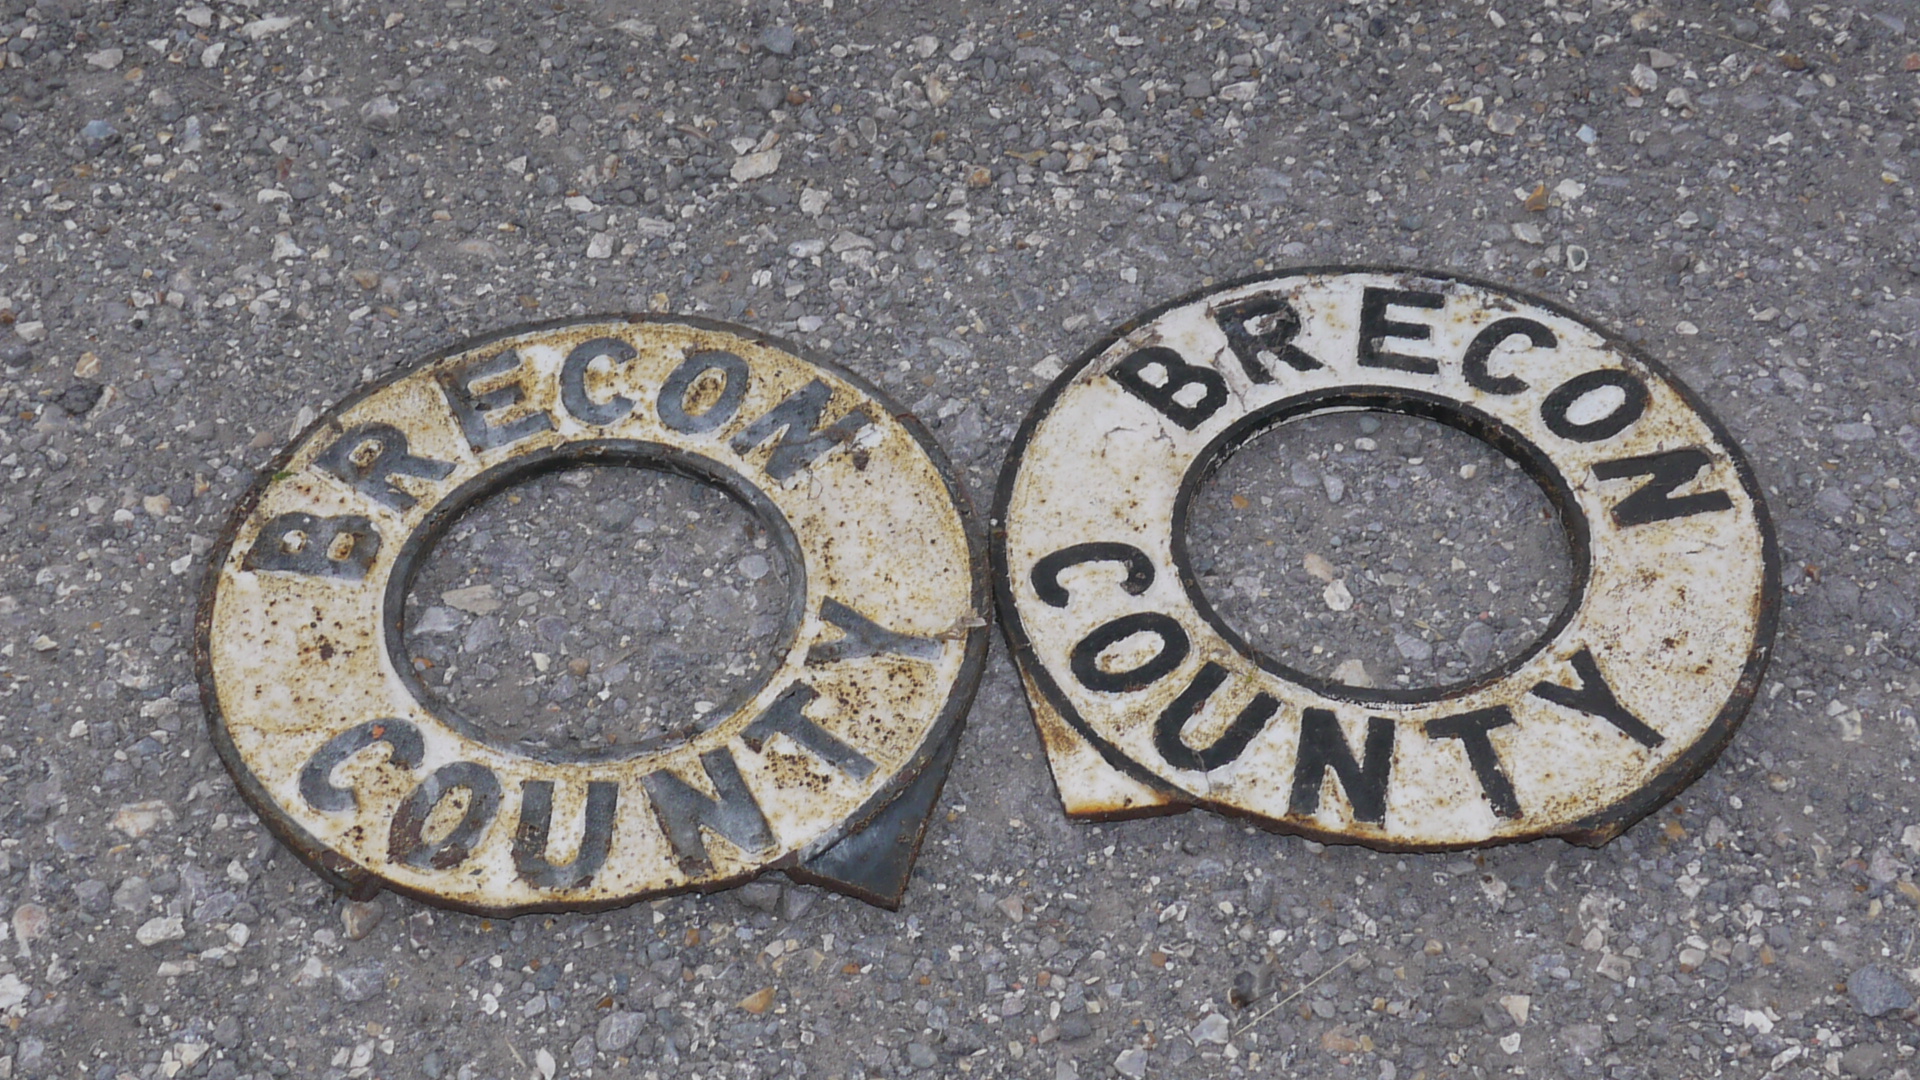 Brecon County Signs, A duo of original cast iron circular ring form post mounted signs, black on